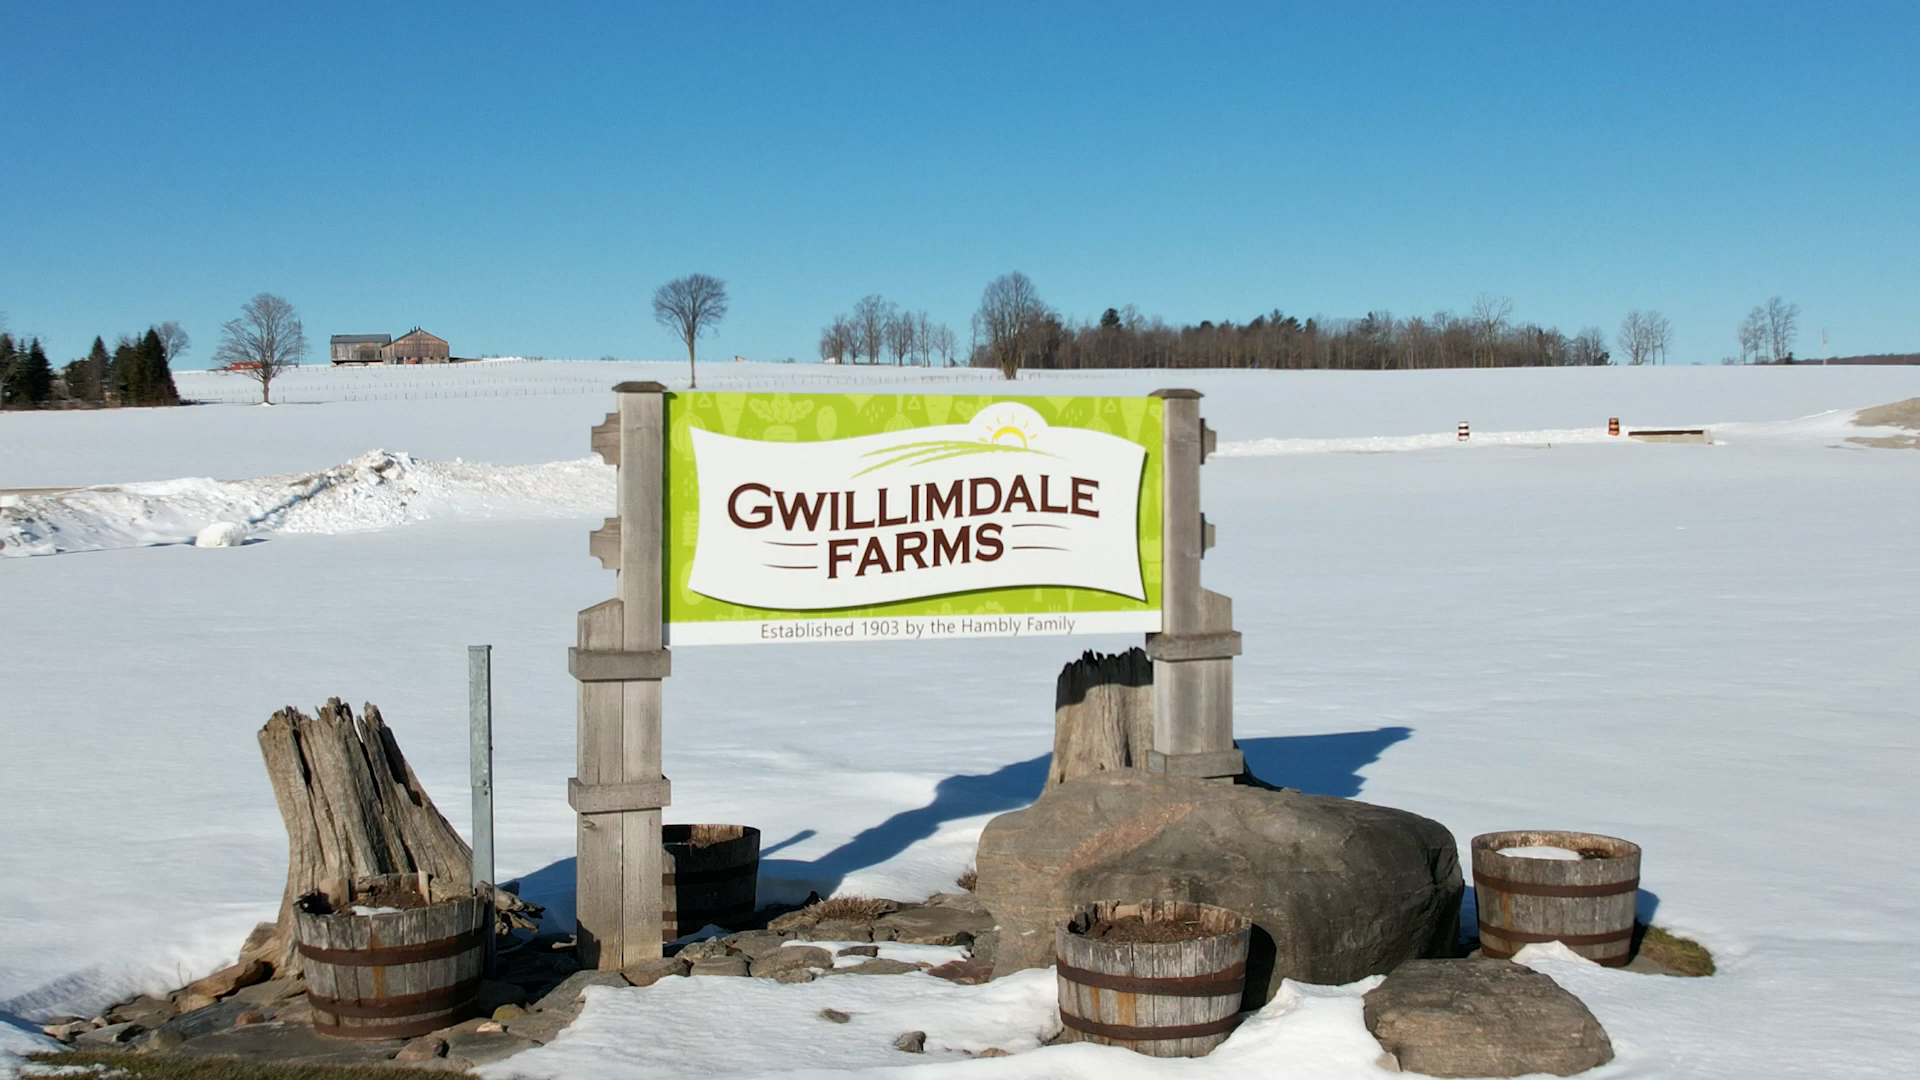 Gwillimdale Cover Image-1